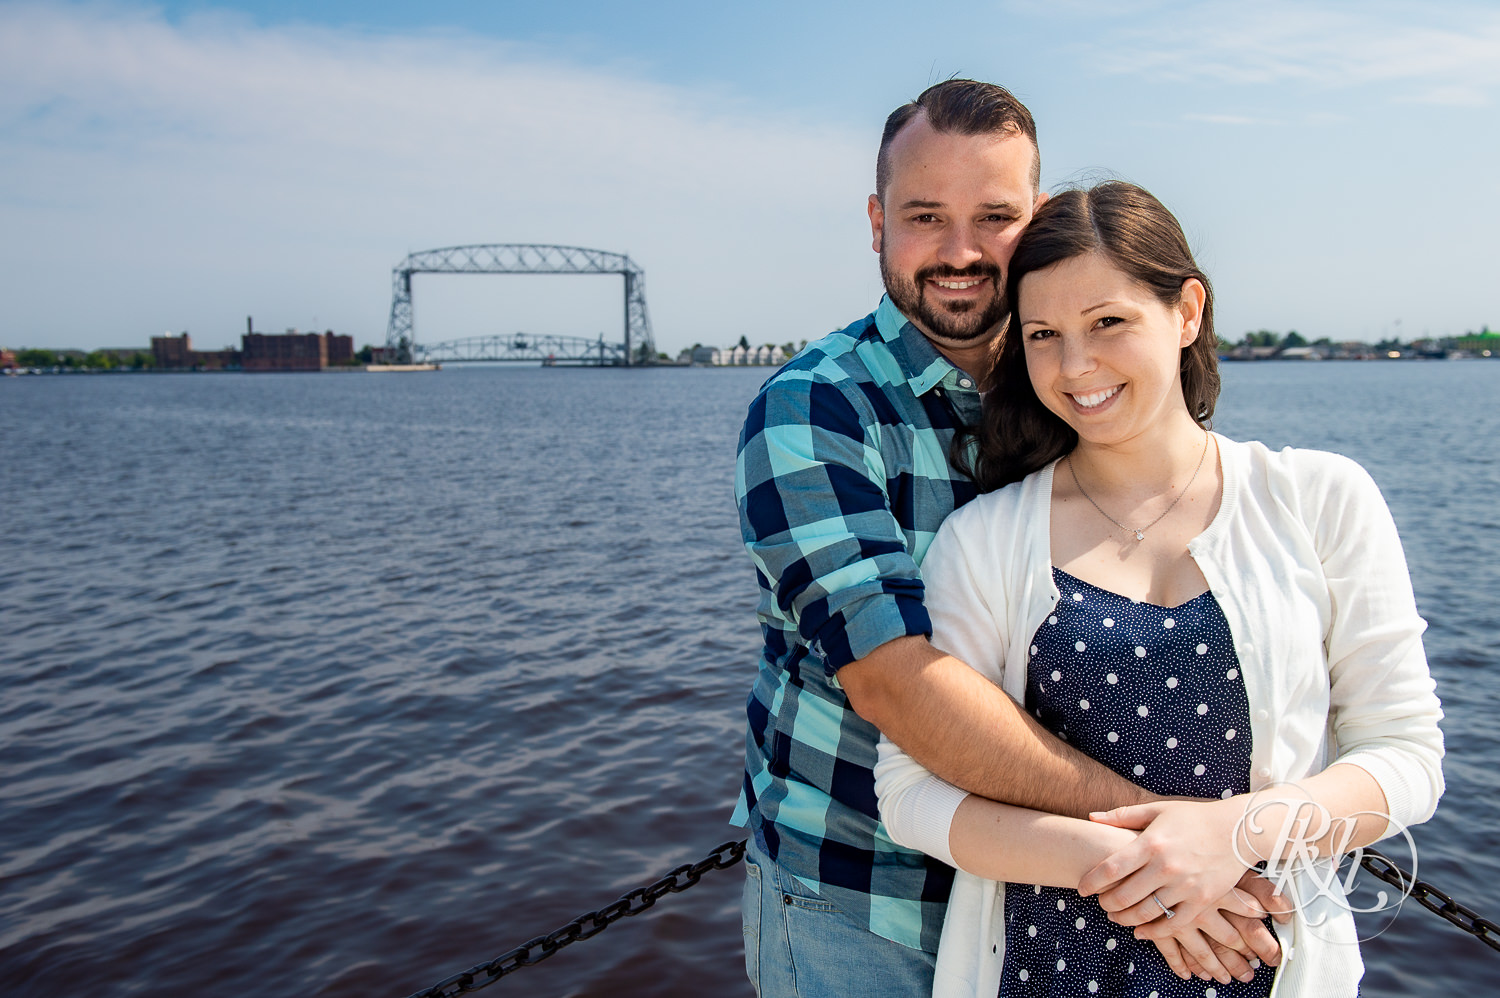 Man and woman smile in front of Lake Superior in Canal Park in Duluth, Minnesota.